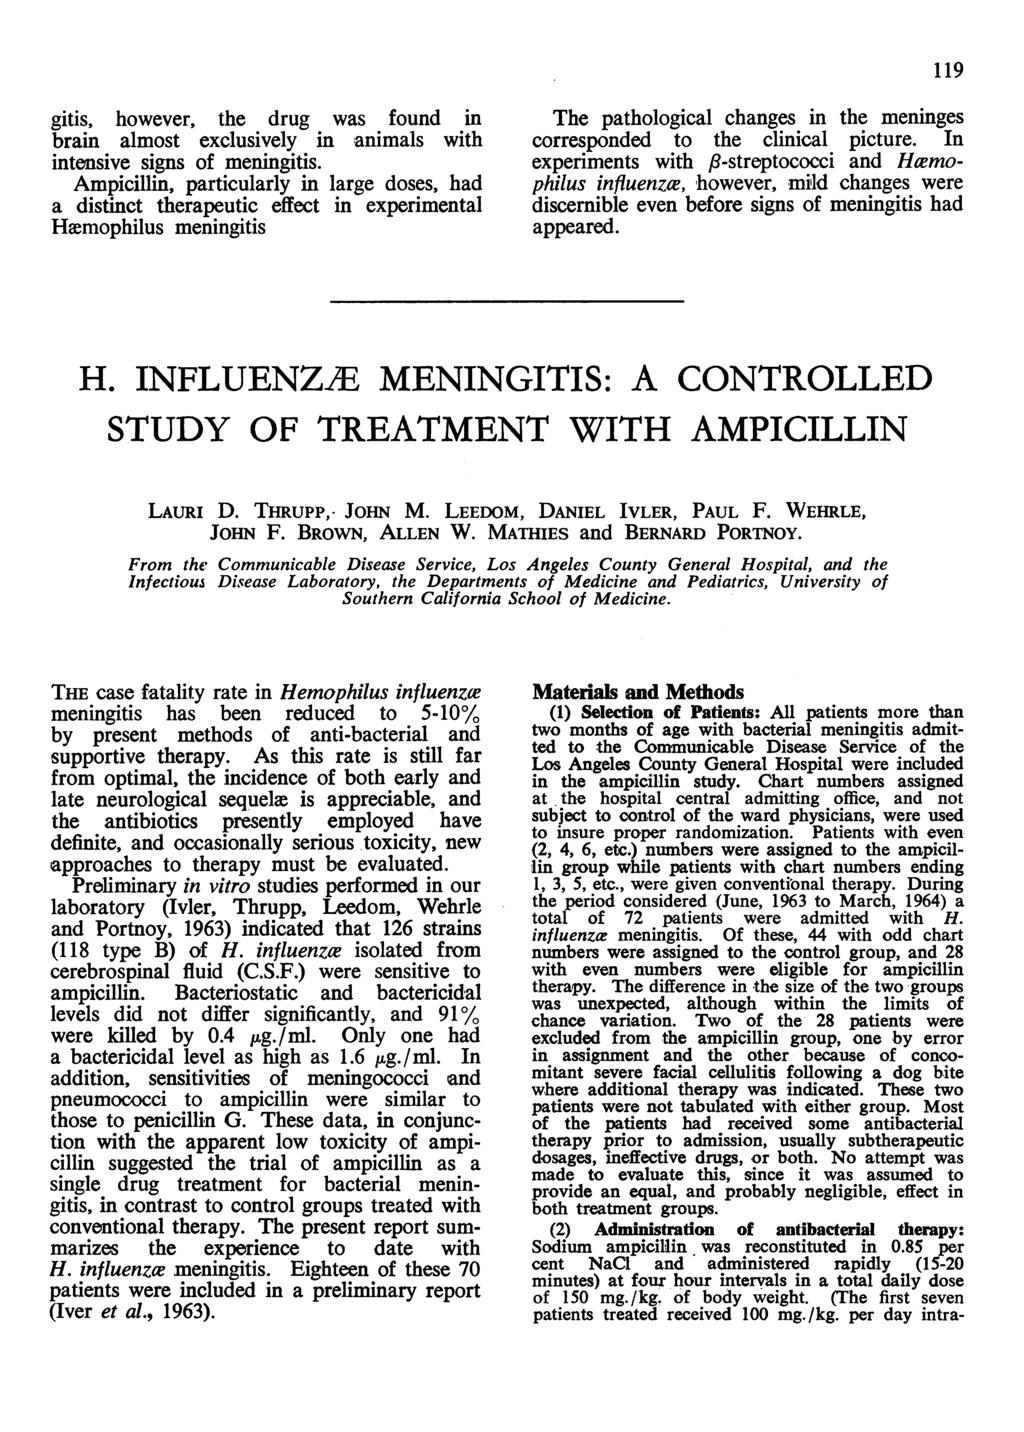 gitis, however, the drug was found in brain almost exclusively in animals with intensive signs of meningitis.